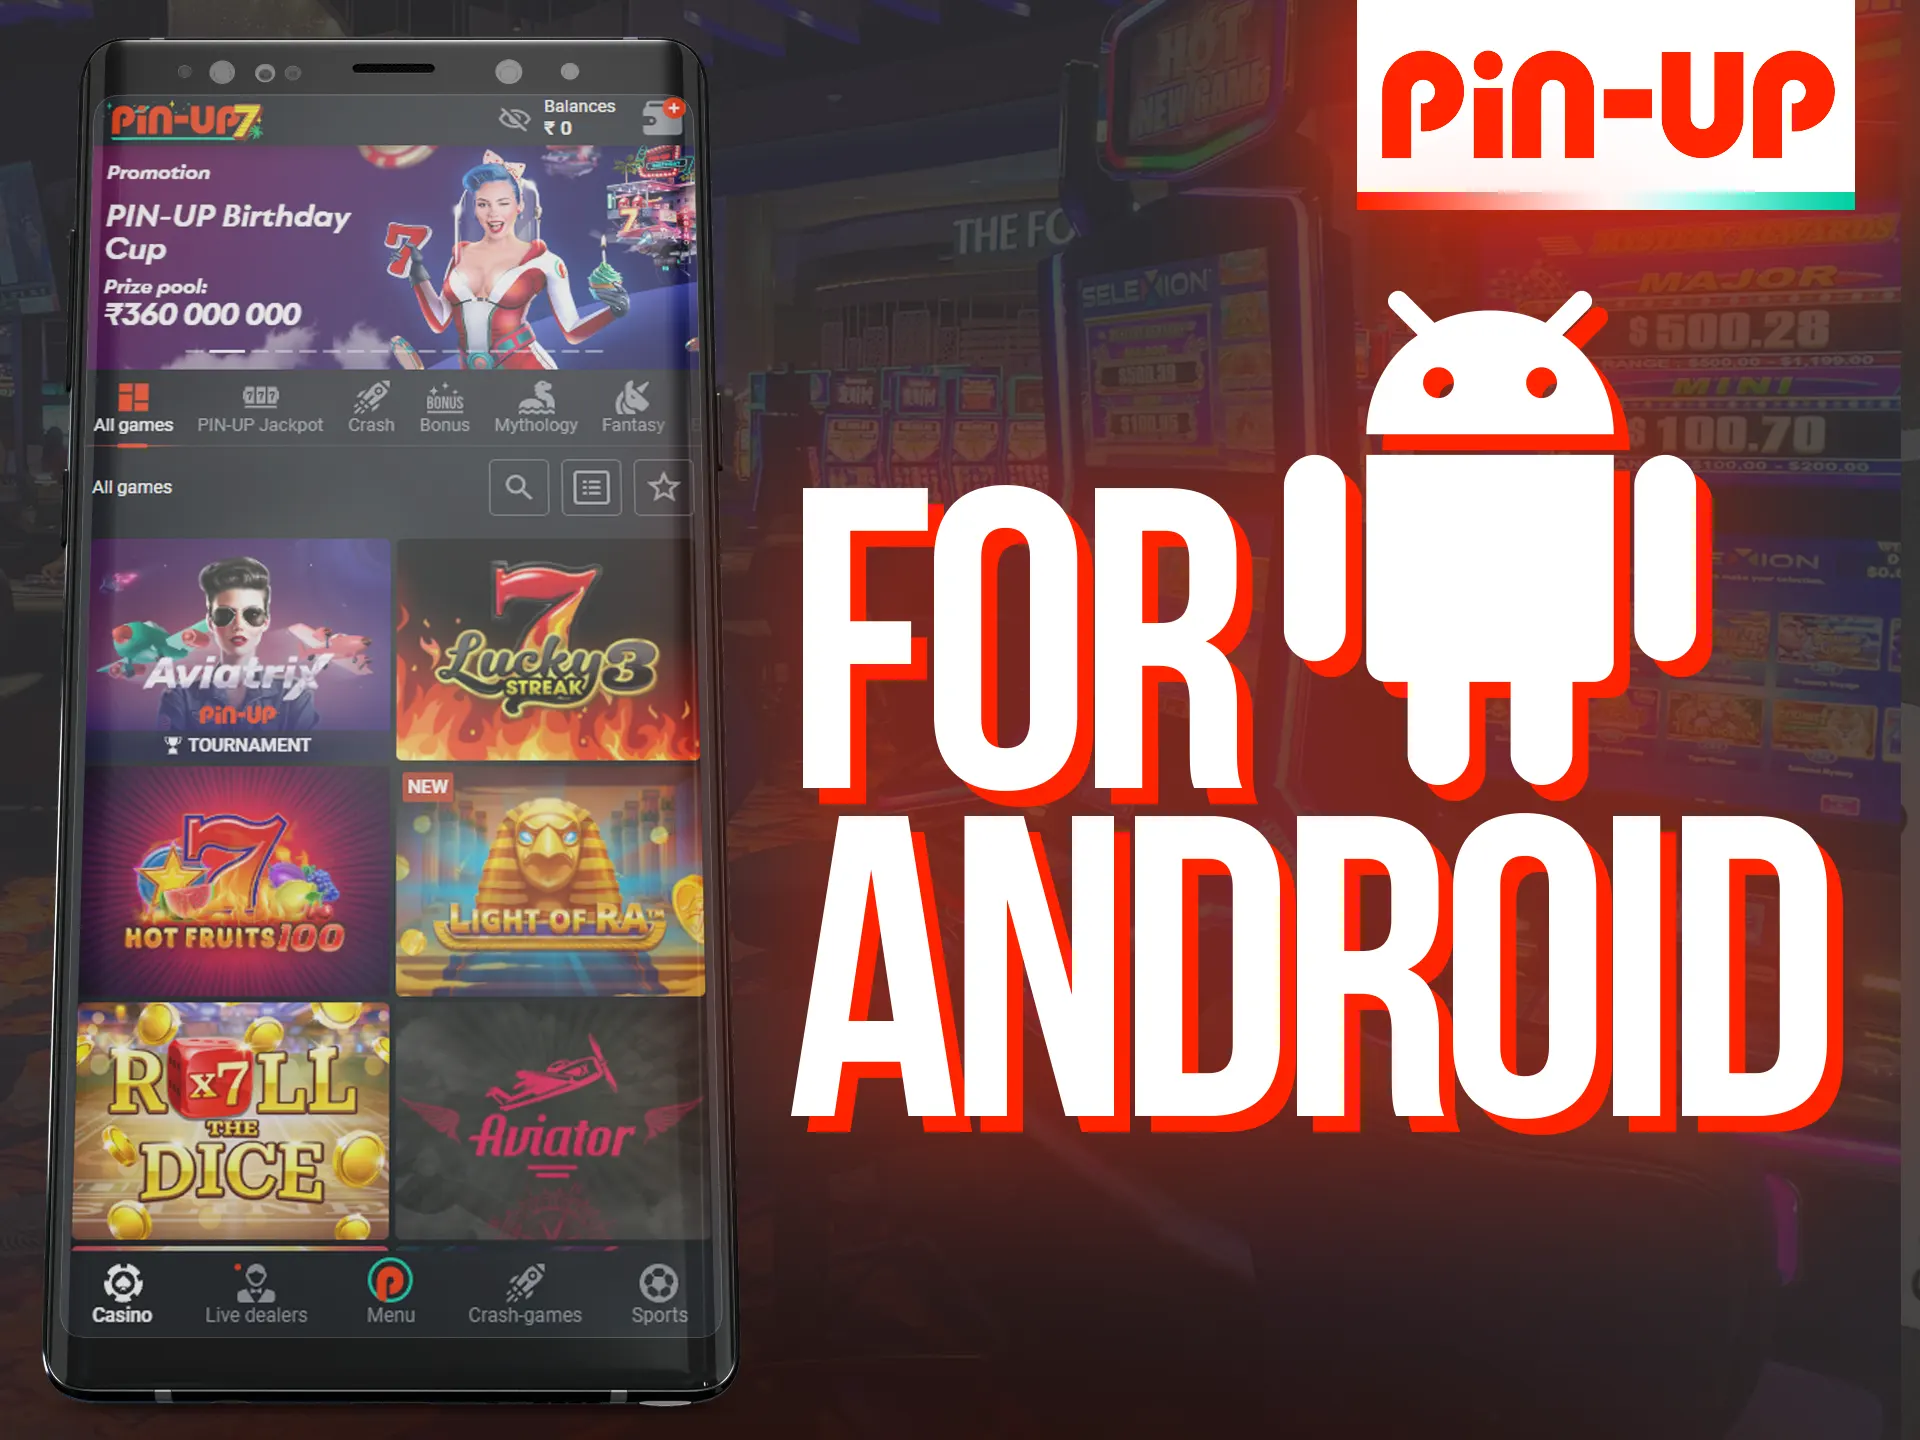 Play online casino Pin-Up from your Android device.